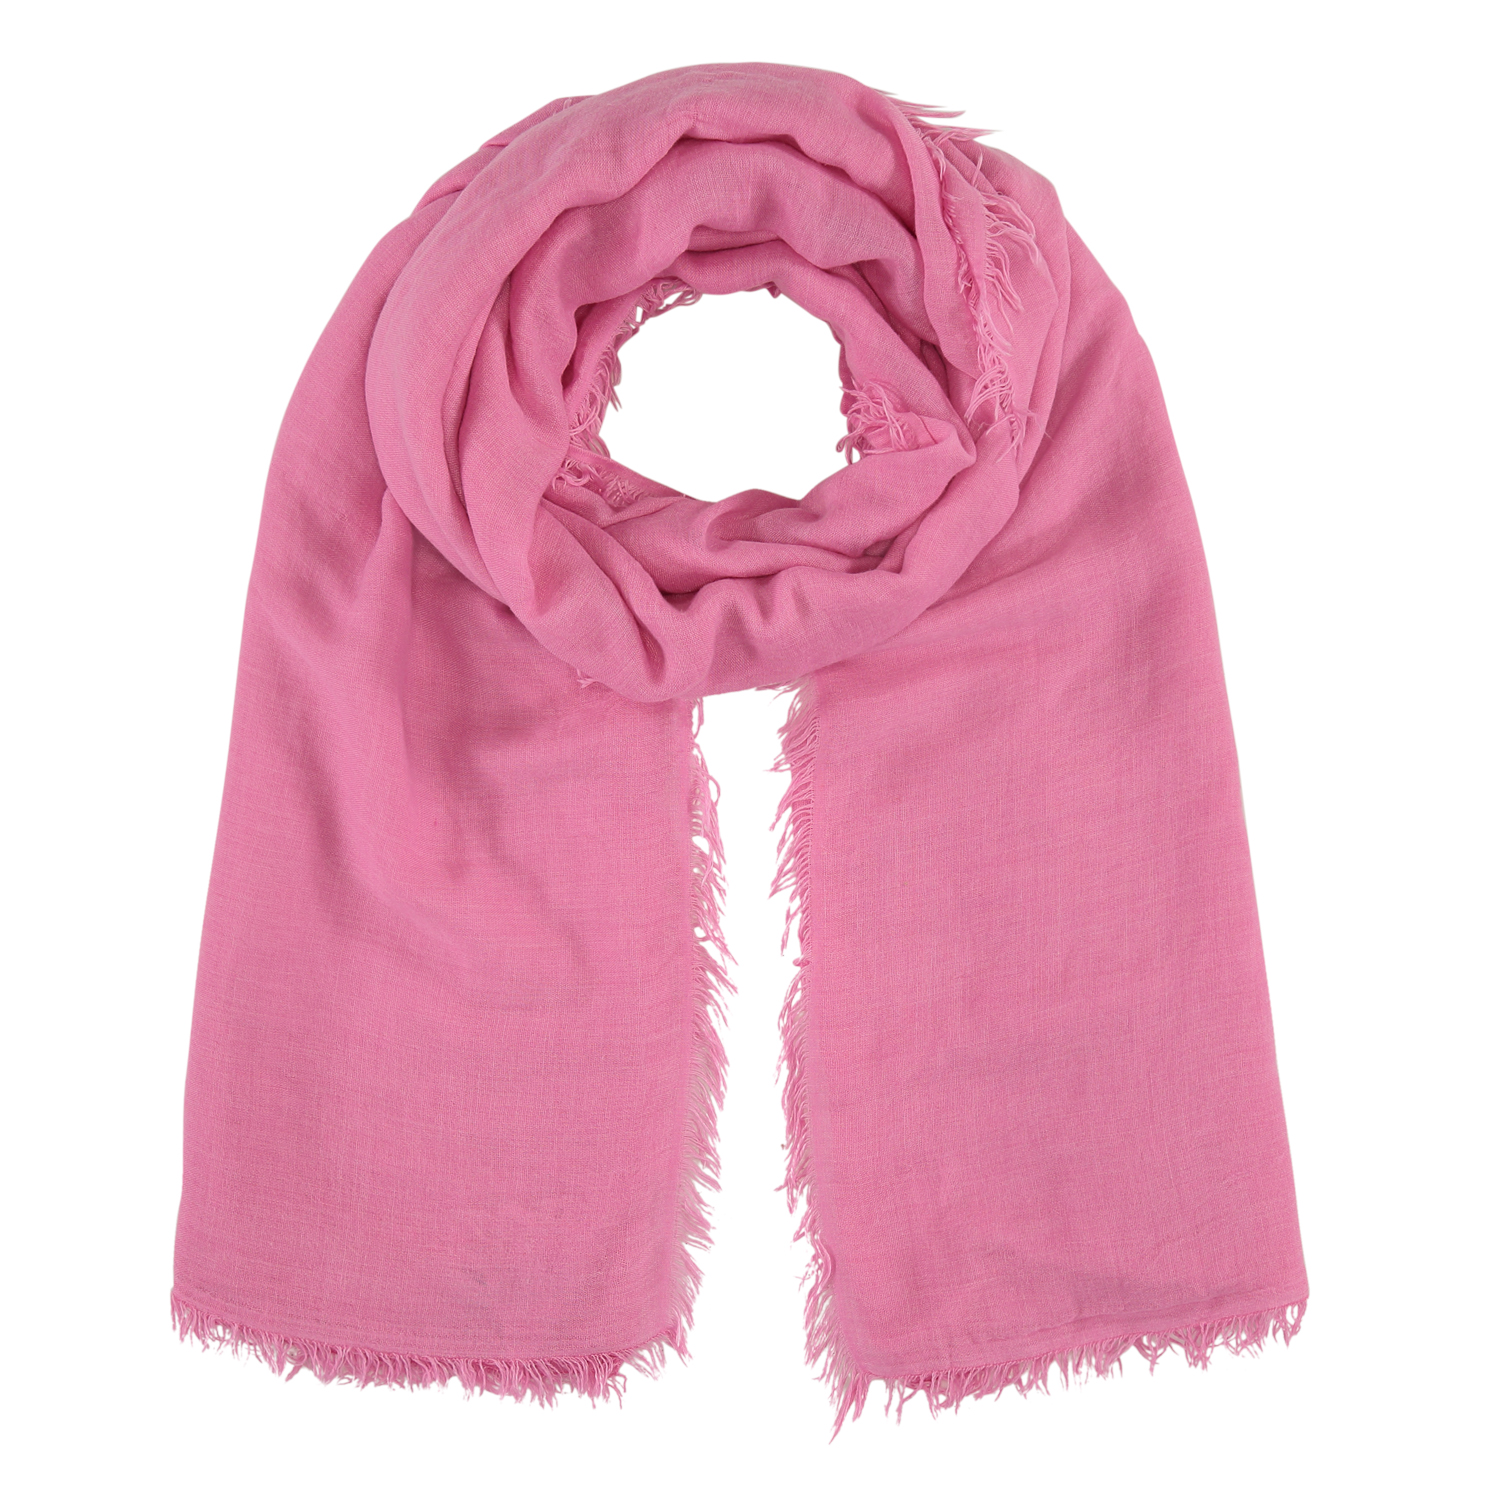 stolona_pink_front